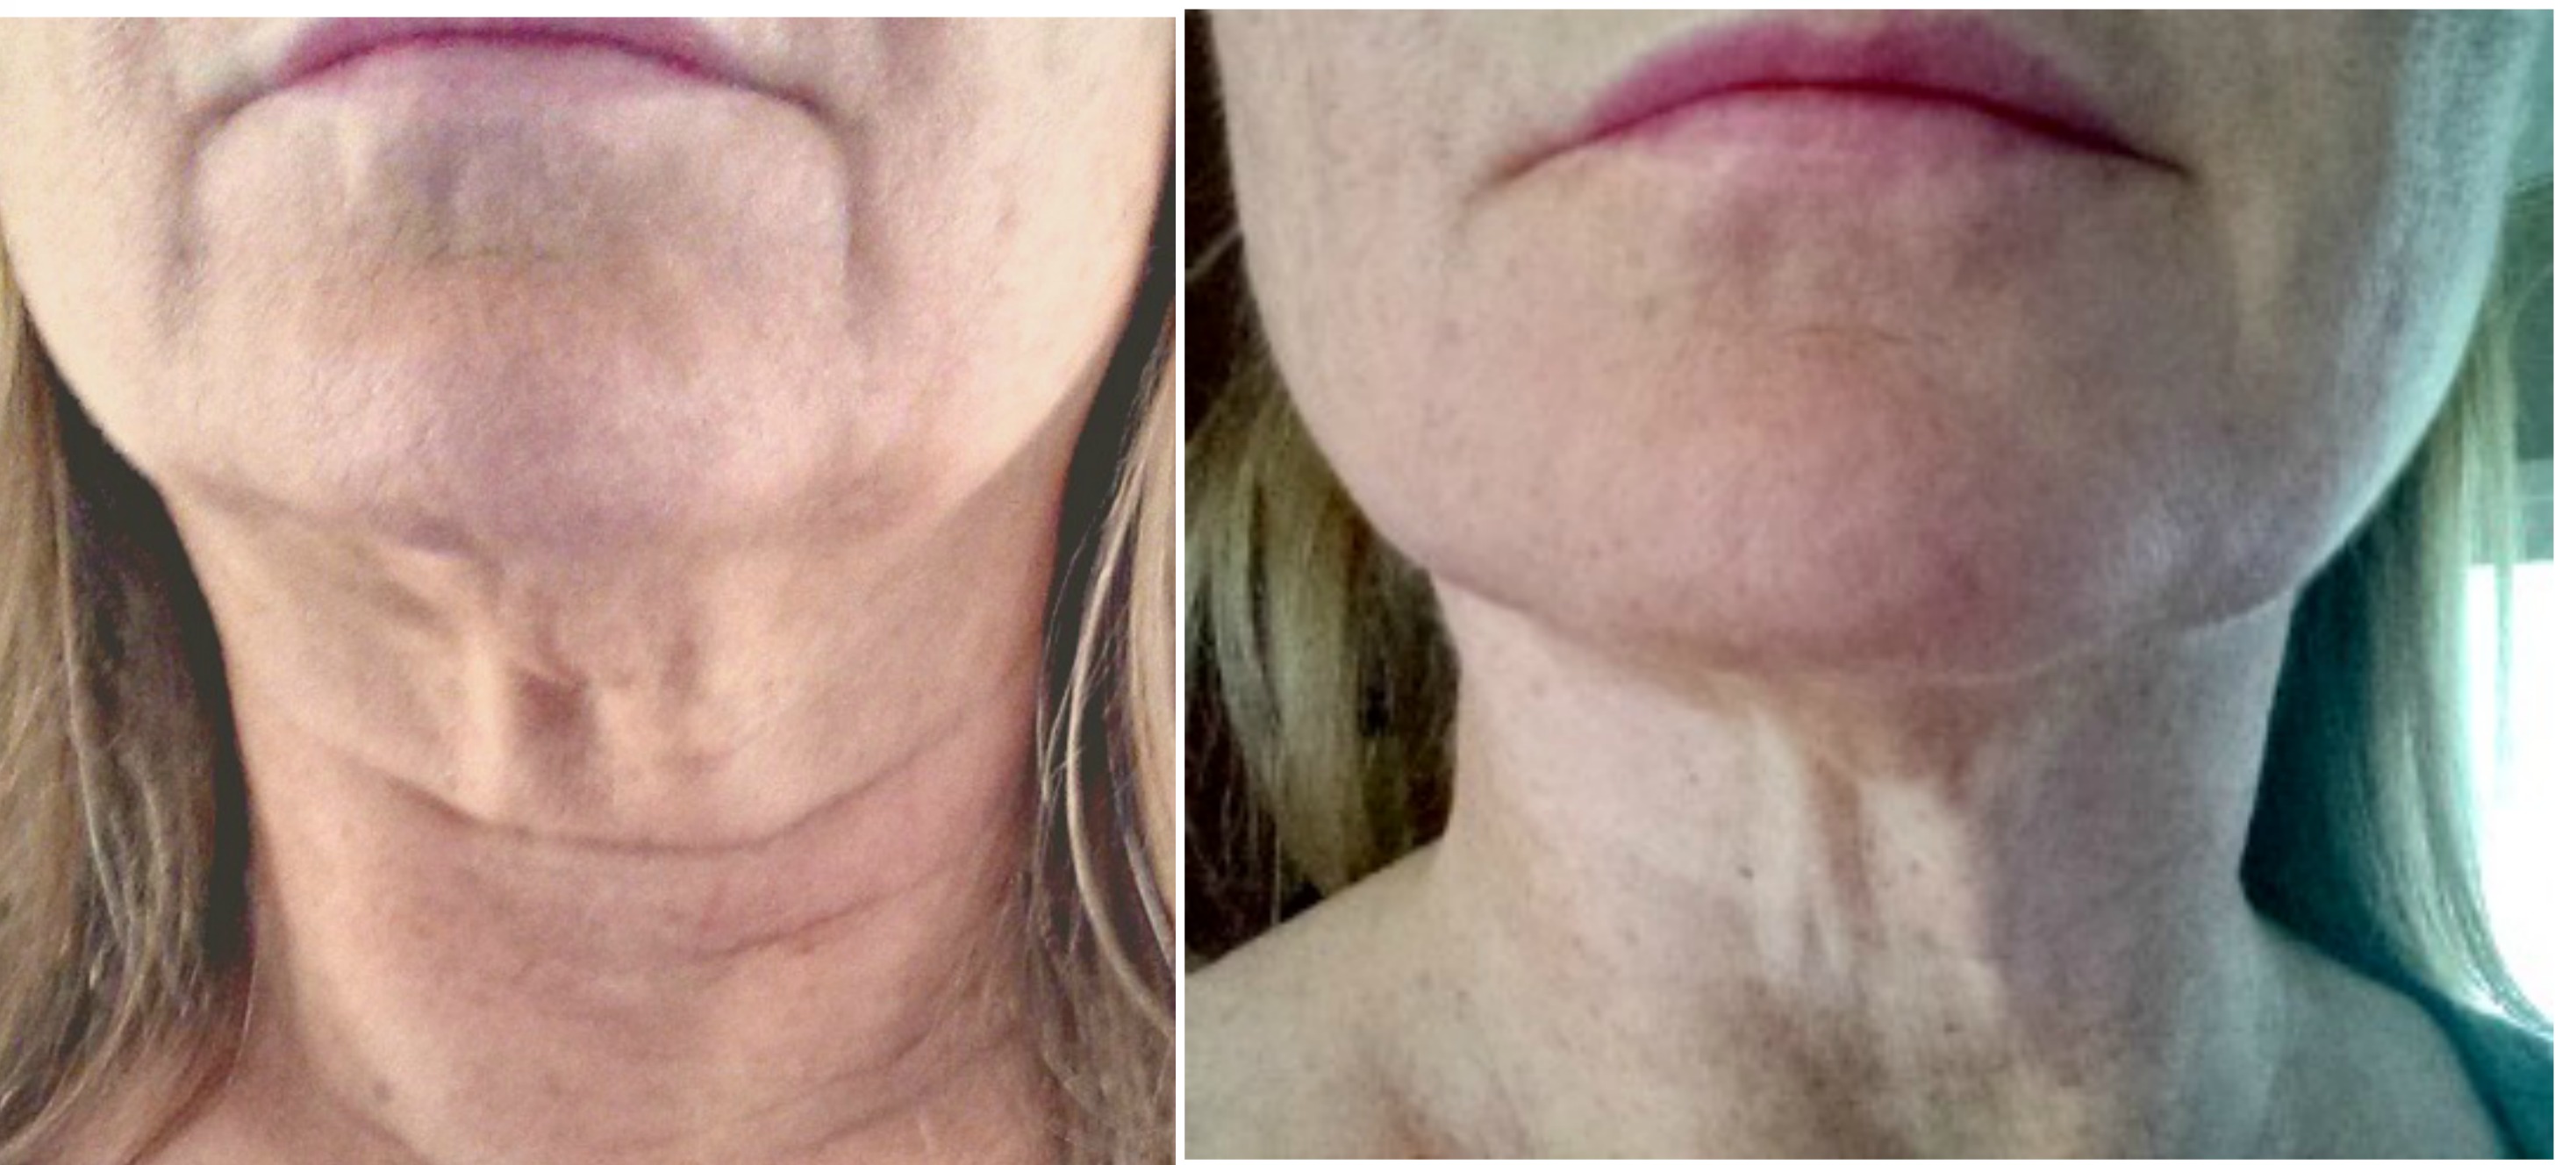 Results of jowl exercises before and after.